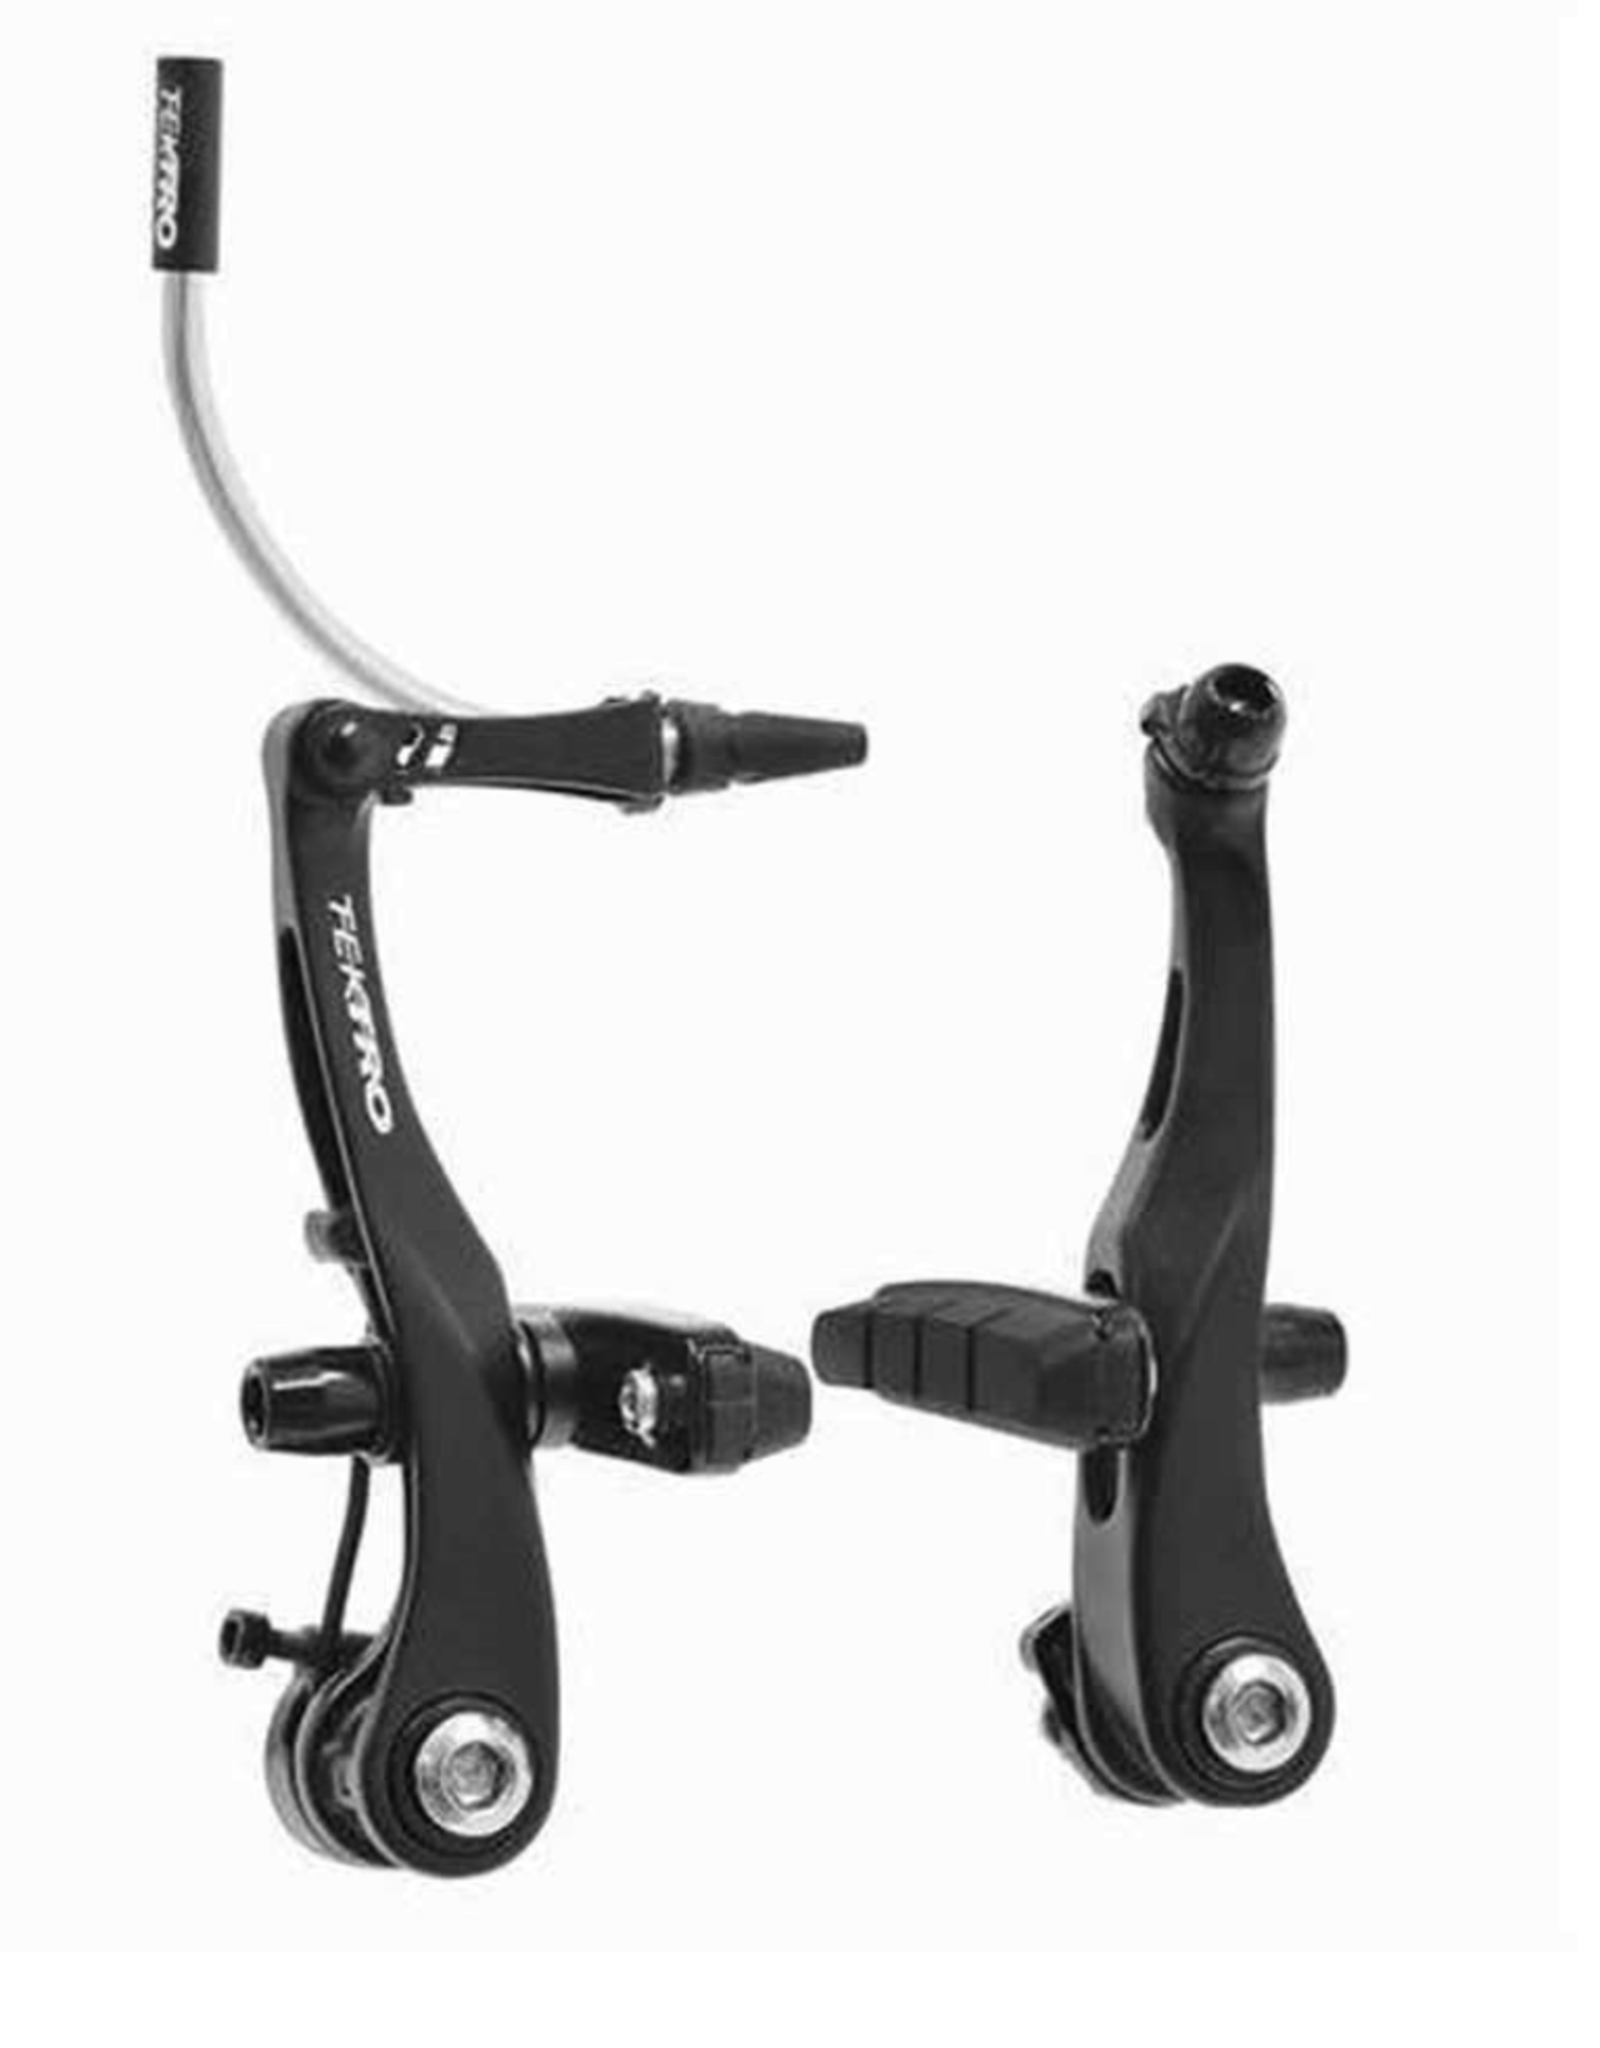 Tektro, RX6, Mini V-Brake, compatible with standard road levers, for one wheel, Black